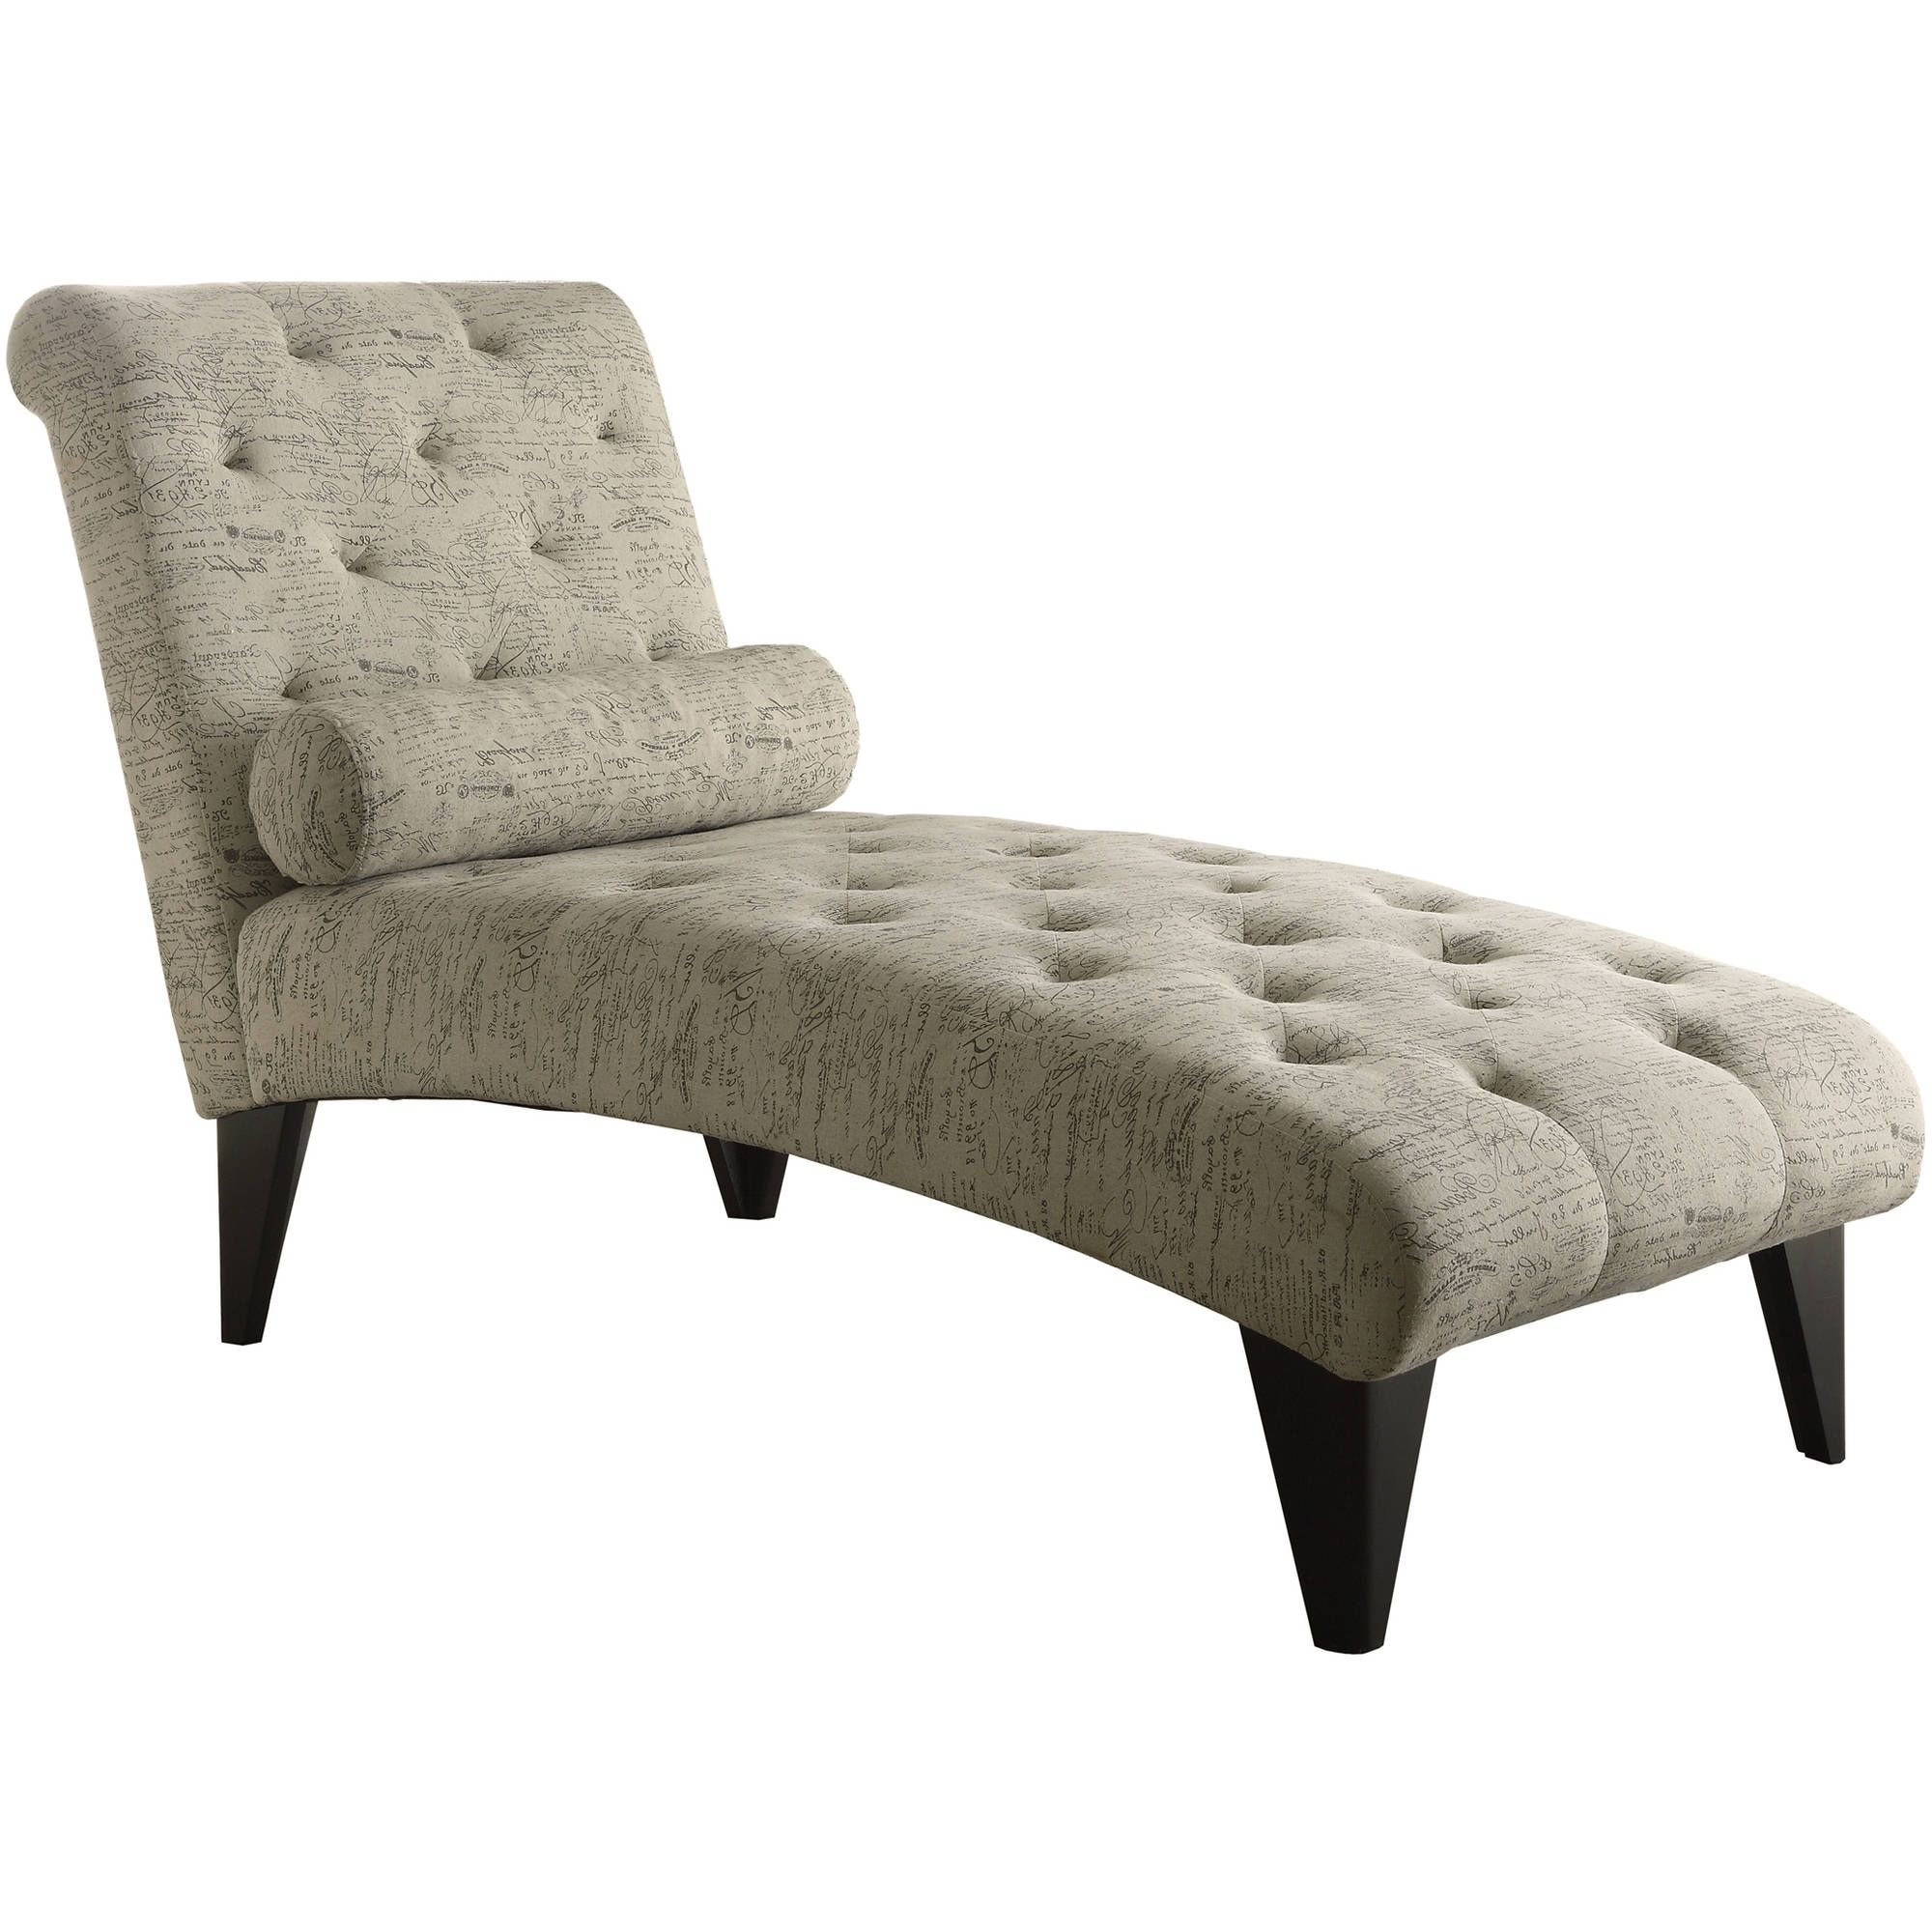 Latest Chaise Lounge Benchs Intended For Chaise Lounges – Walmart (Photo 4 of 15)